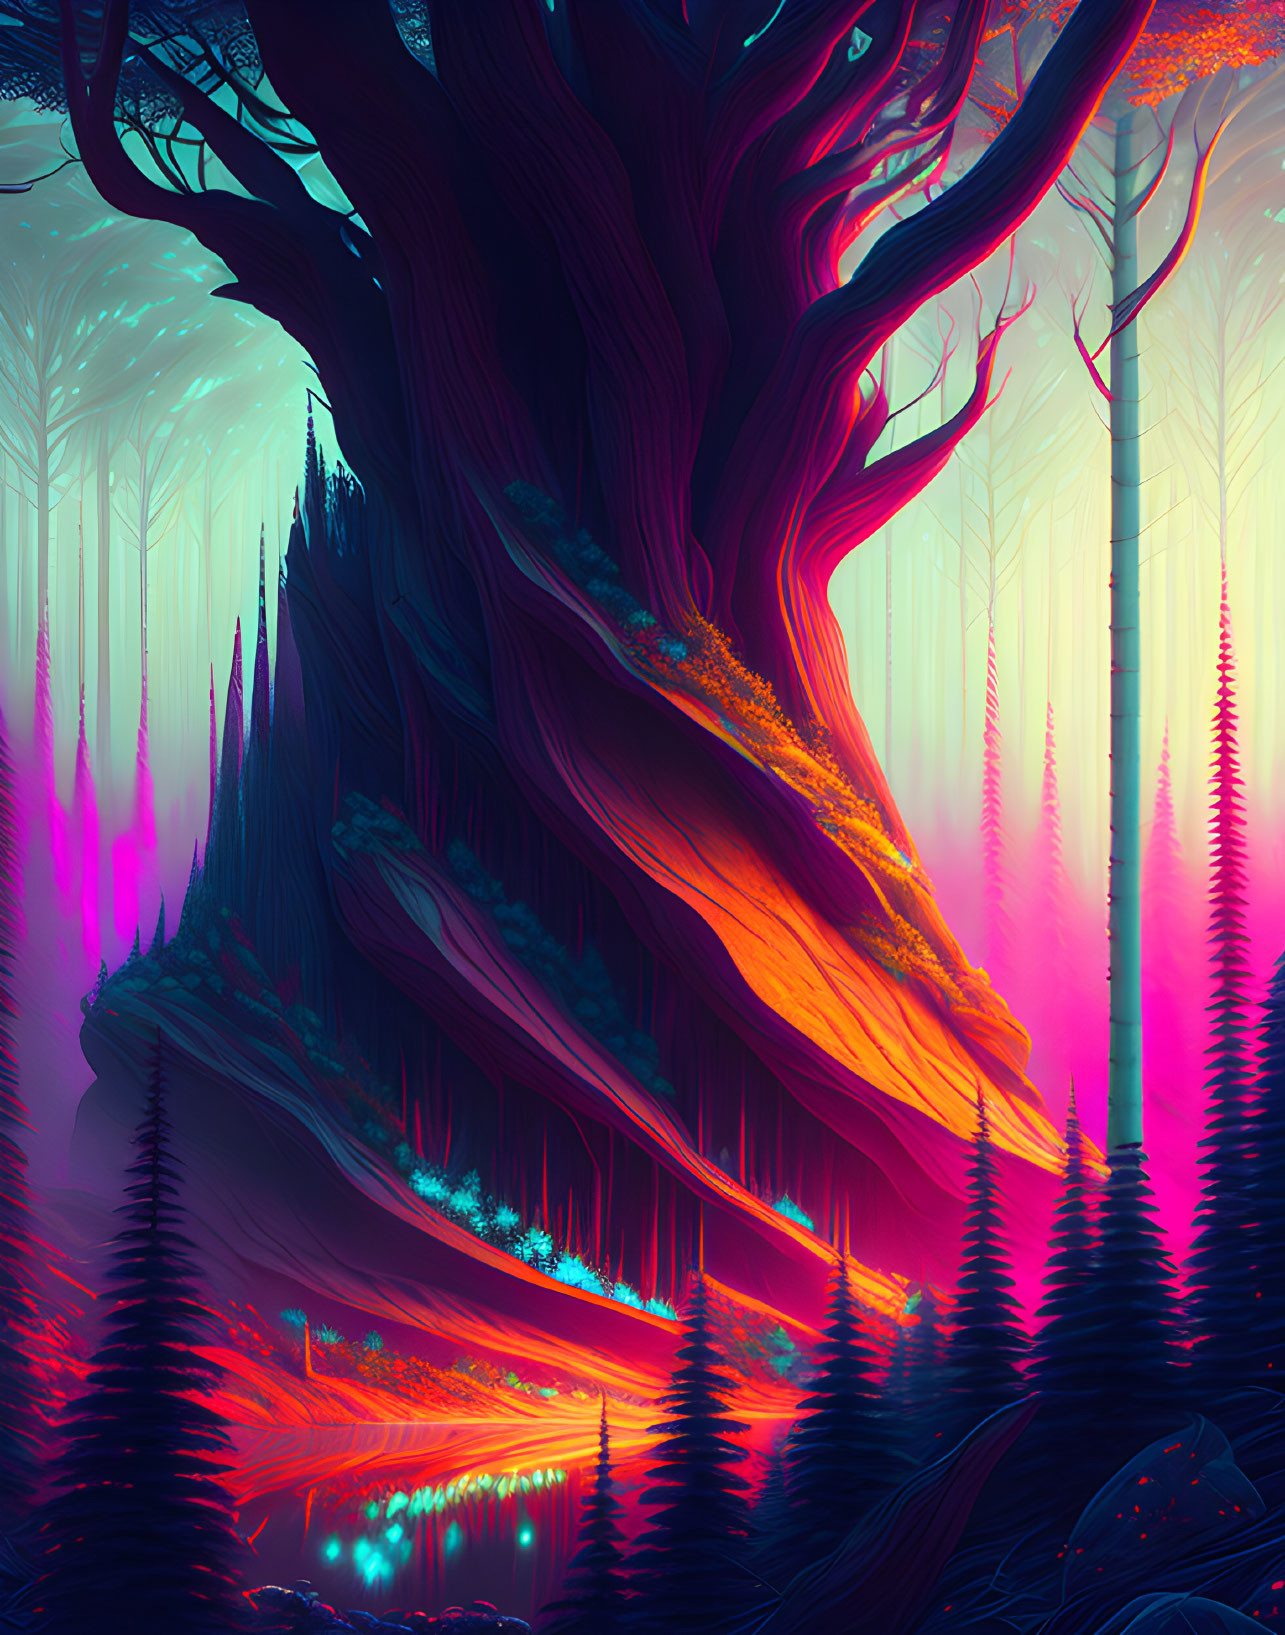 Mystical forest digital artwork with colossal tree and neon hues